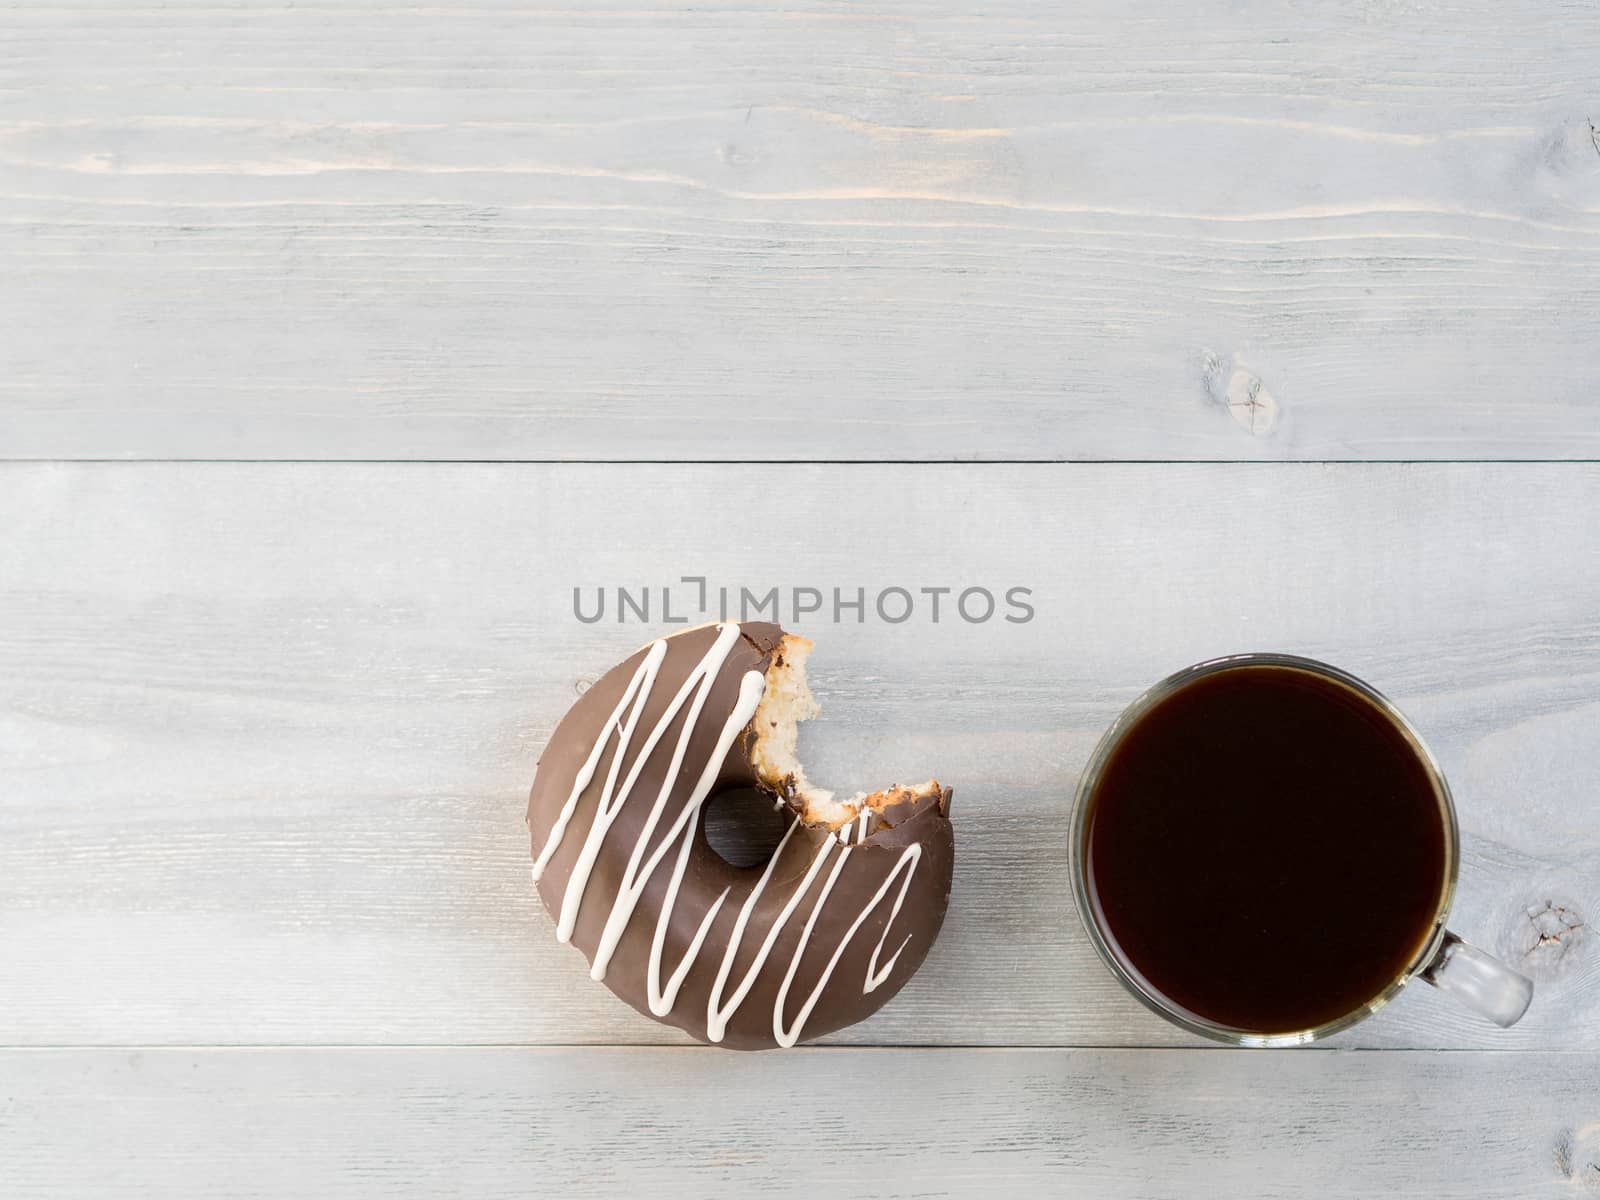 Top view of chocolate donut and coffee on gray wooden background with copy space. Glazed doughnuts and coffee on grey wooden table with copyspace.